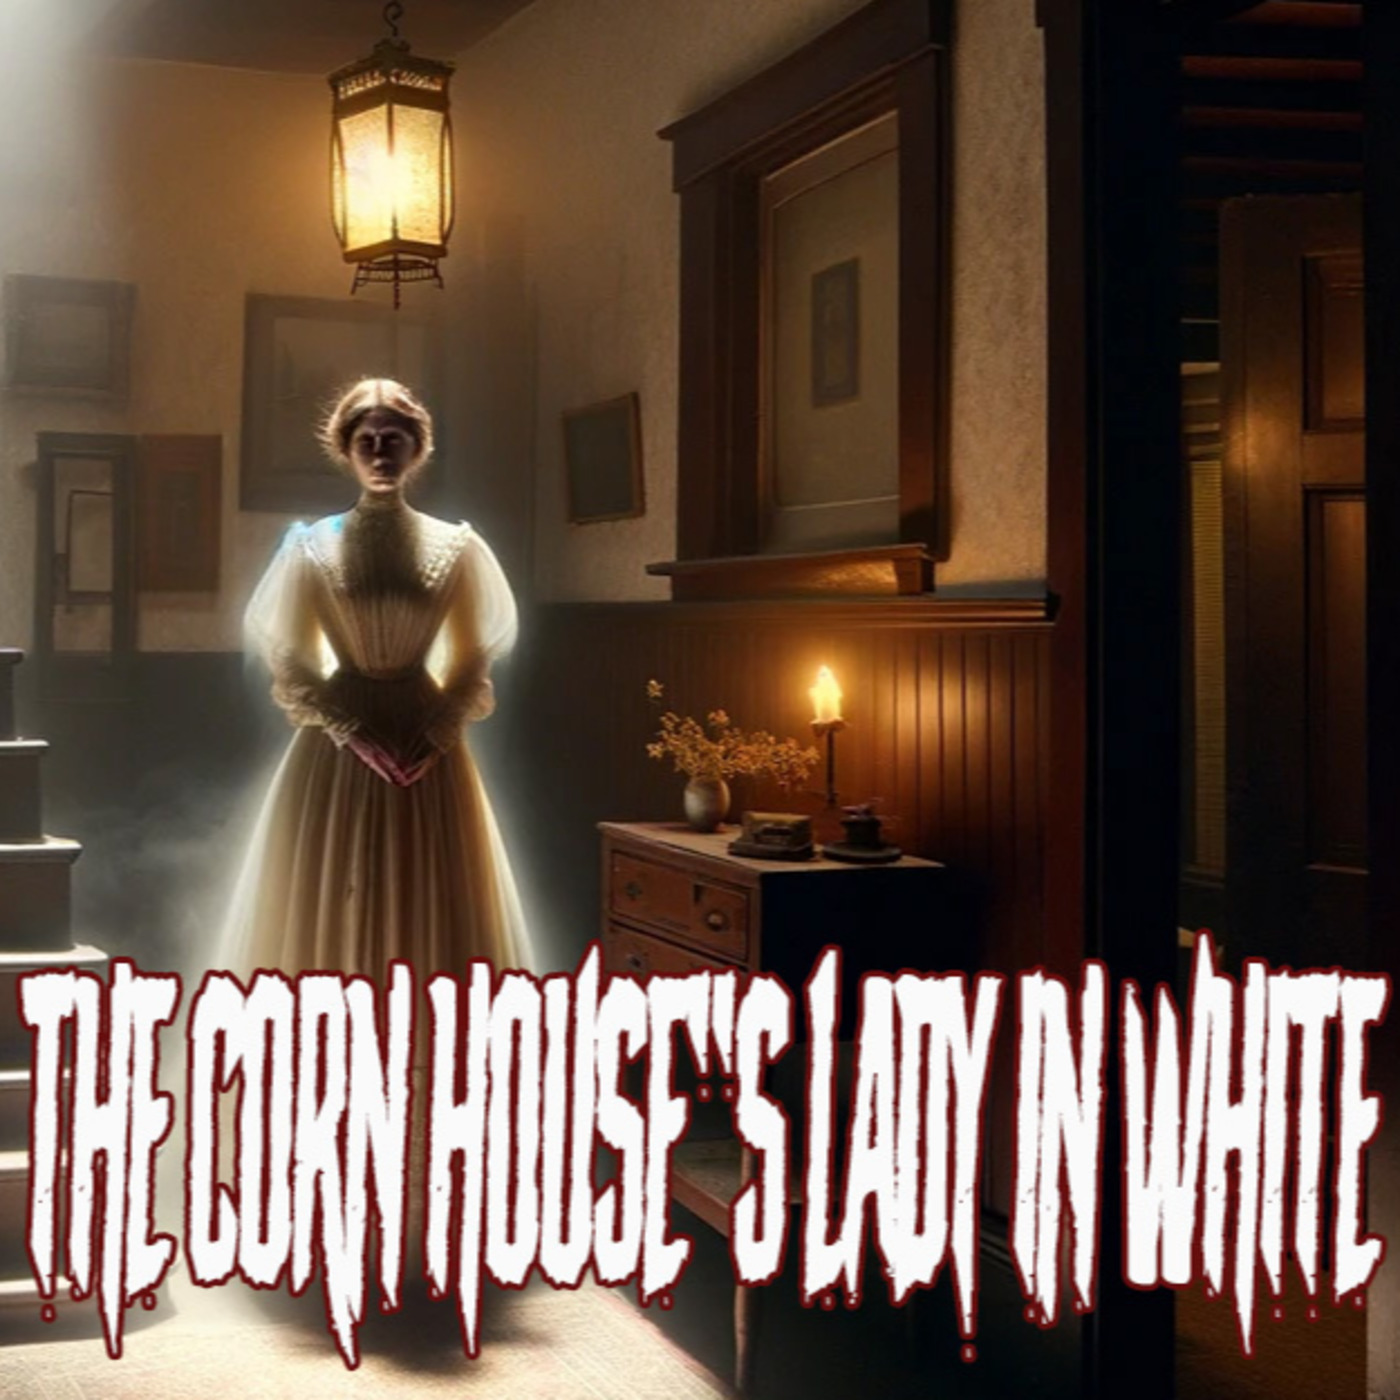 Episode 115: The Corn House's Lady in White